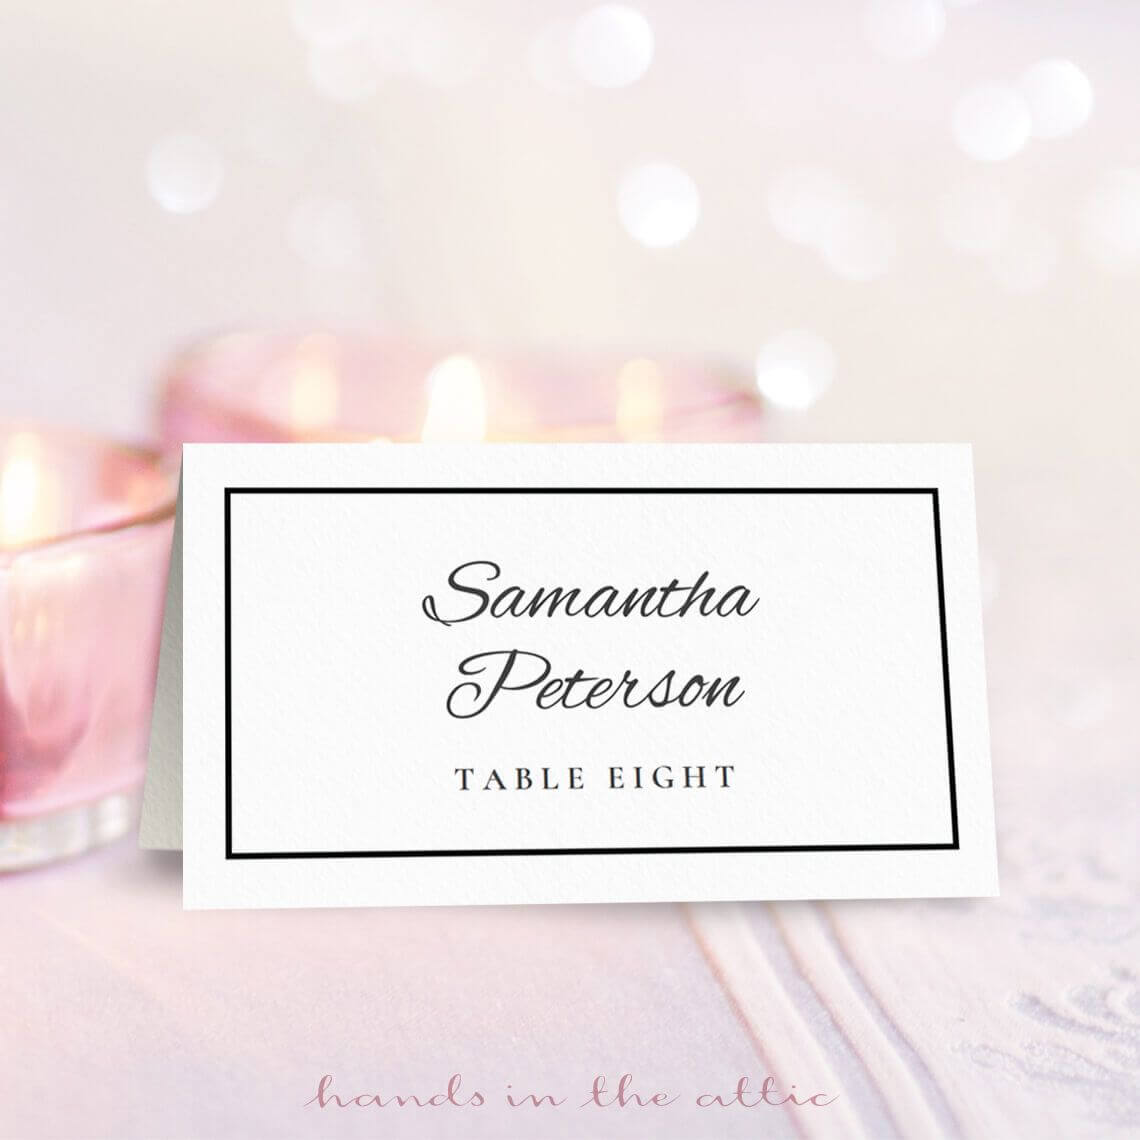 Wedding Place Card Template | Free Place Card Template Intended For Table Place Card Template Free Download